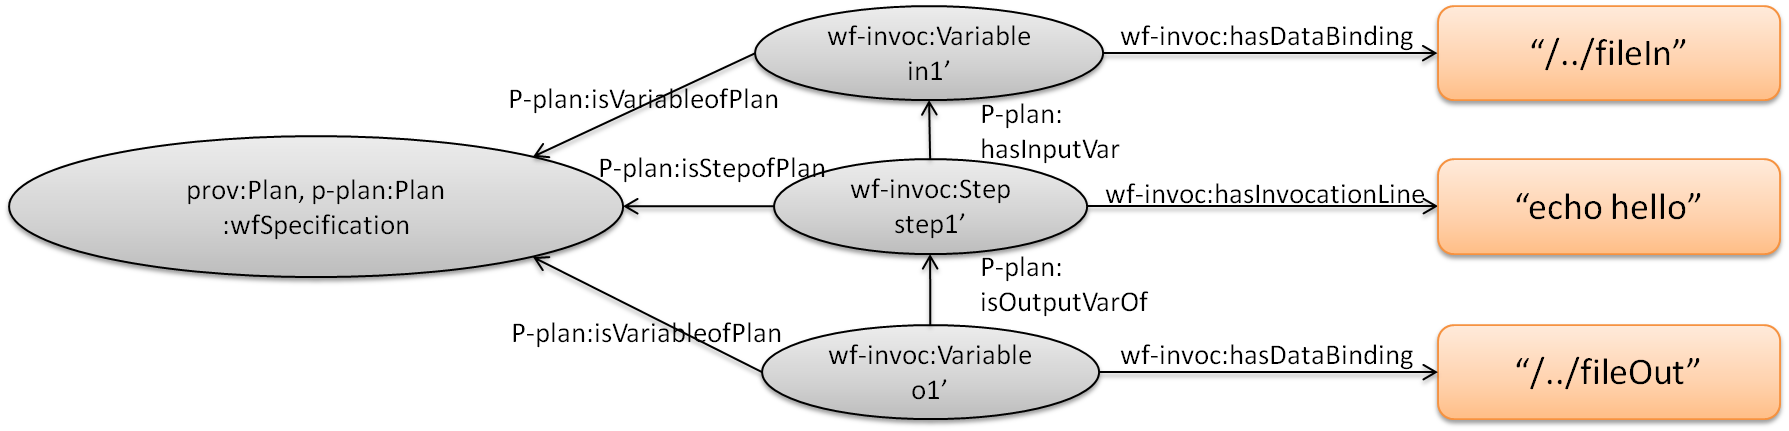 Wf-invoc extending p-plan to represent workflow invocation.